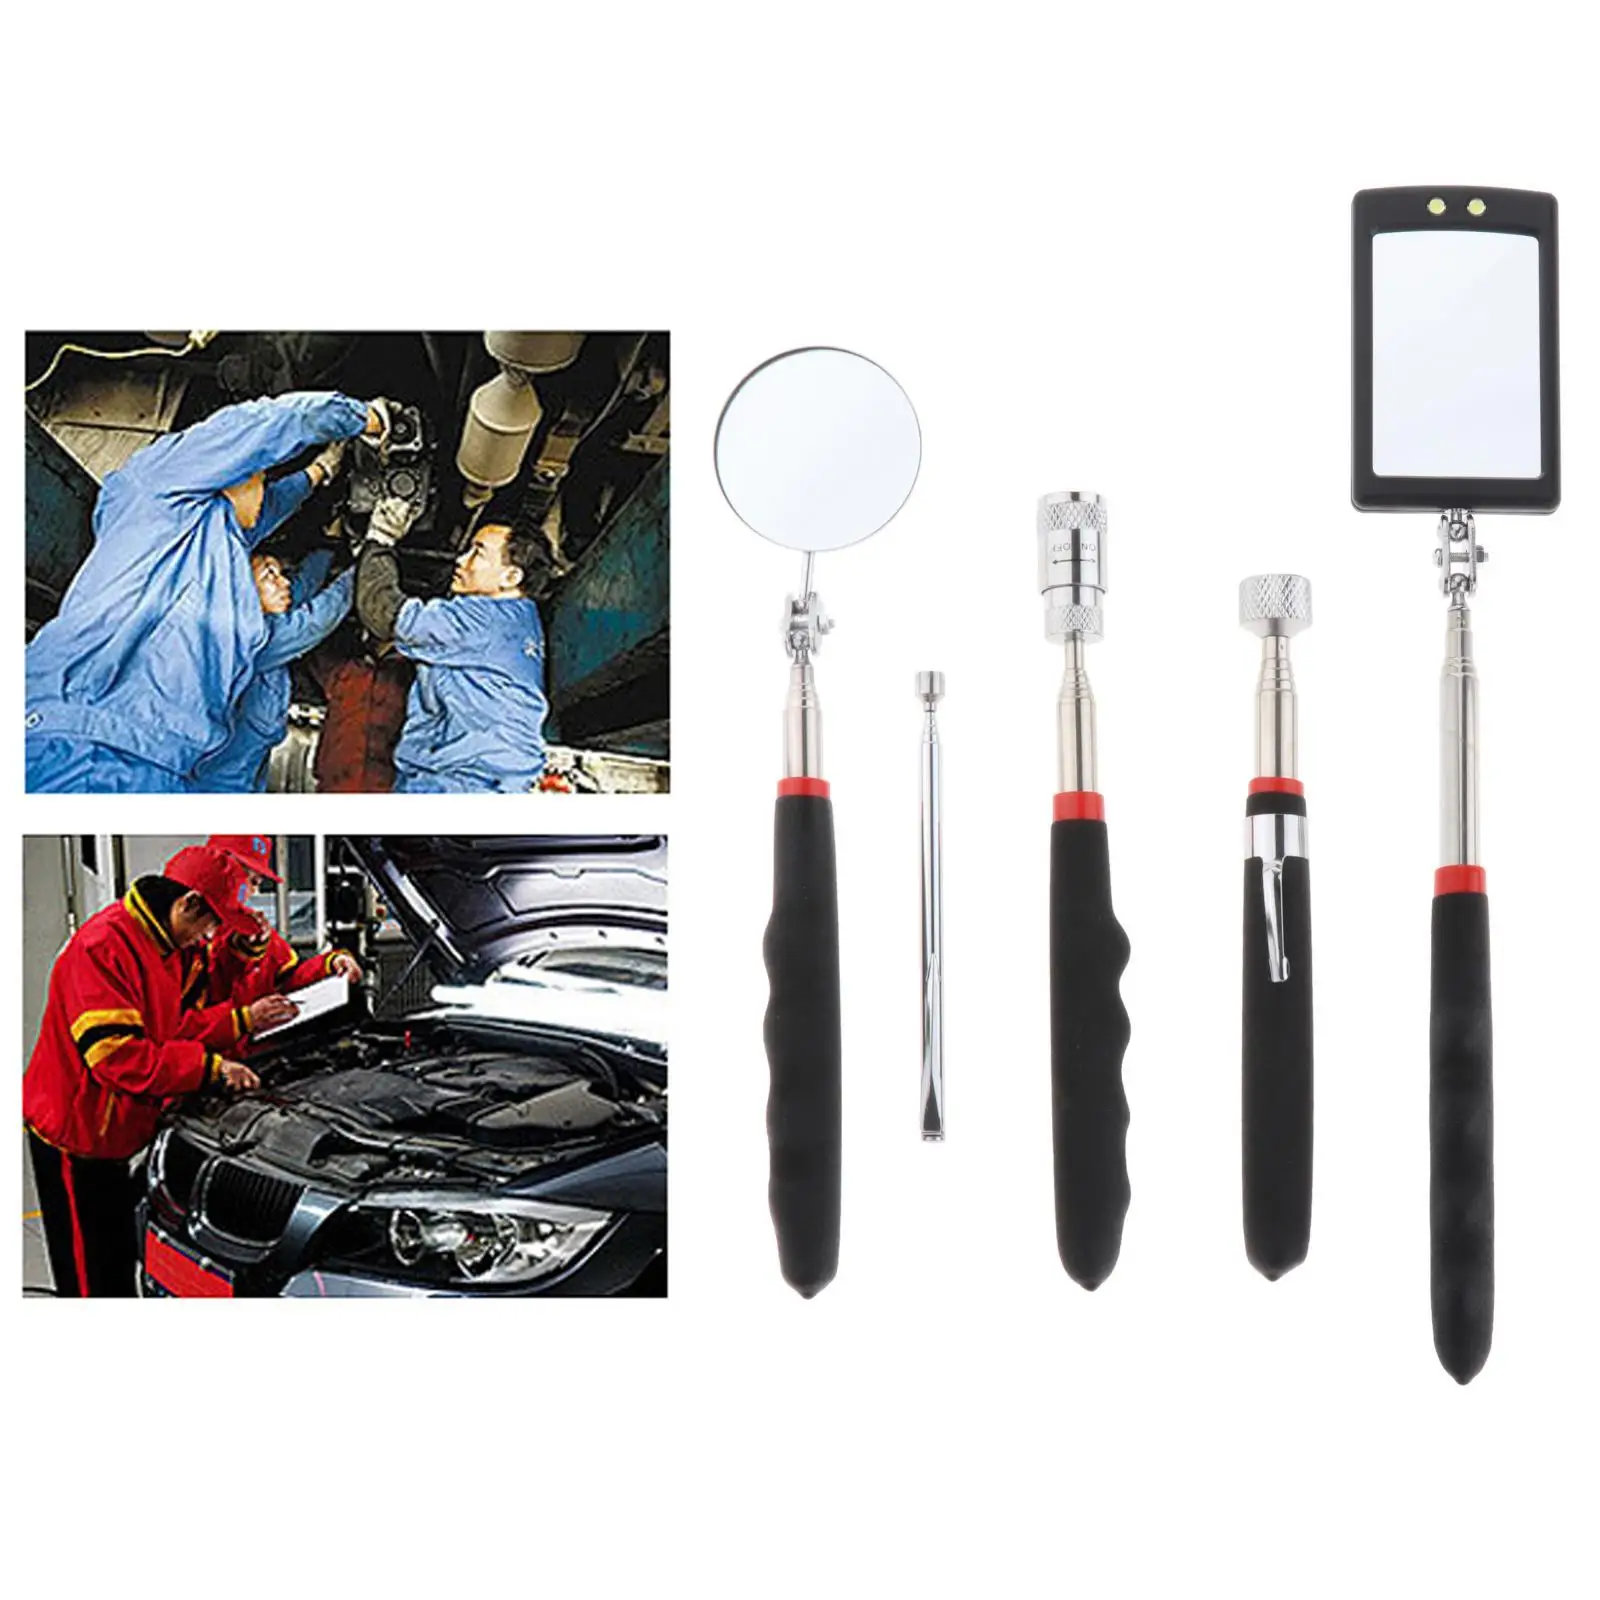  Telescoping Pick Tool Kit Retractable Fit for Car Maintenance